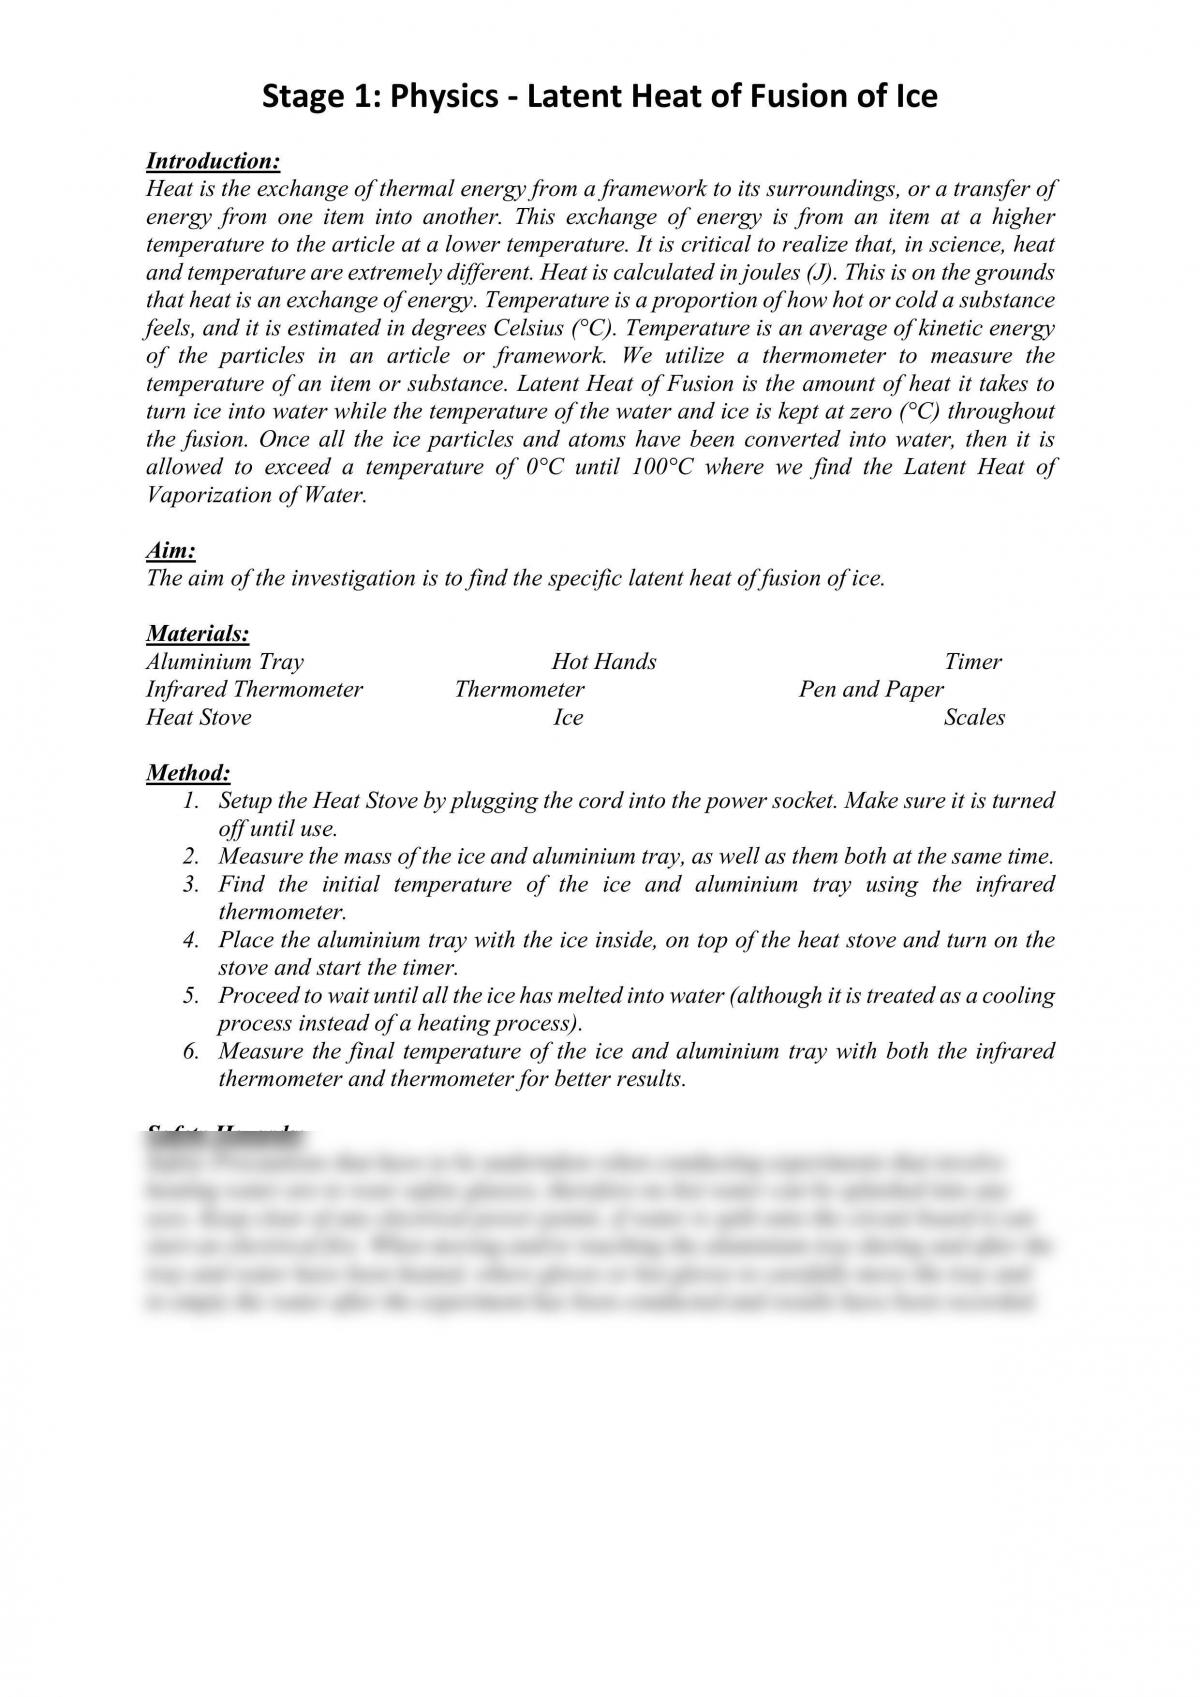 Latent Heat of Fusion of Ice - Page 1